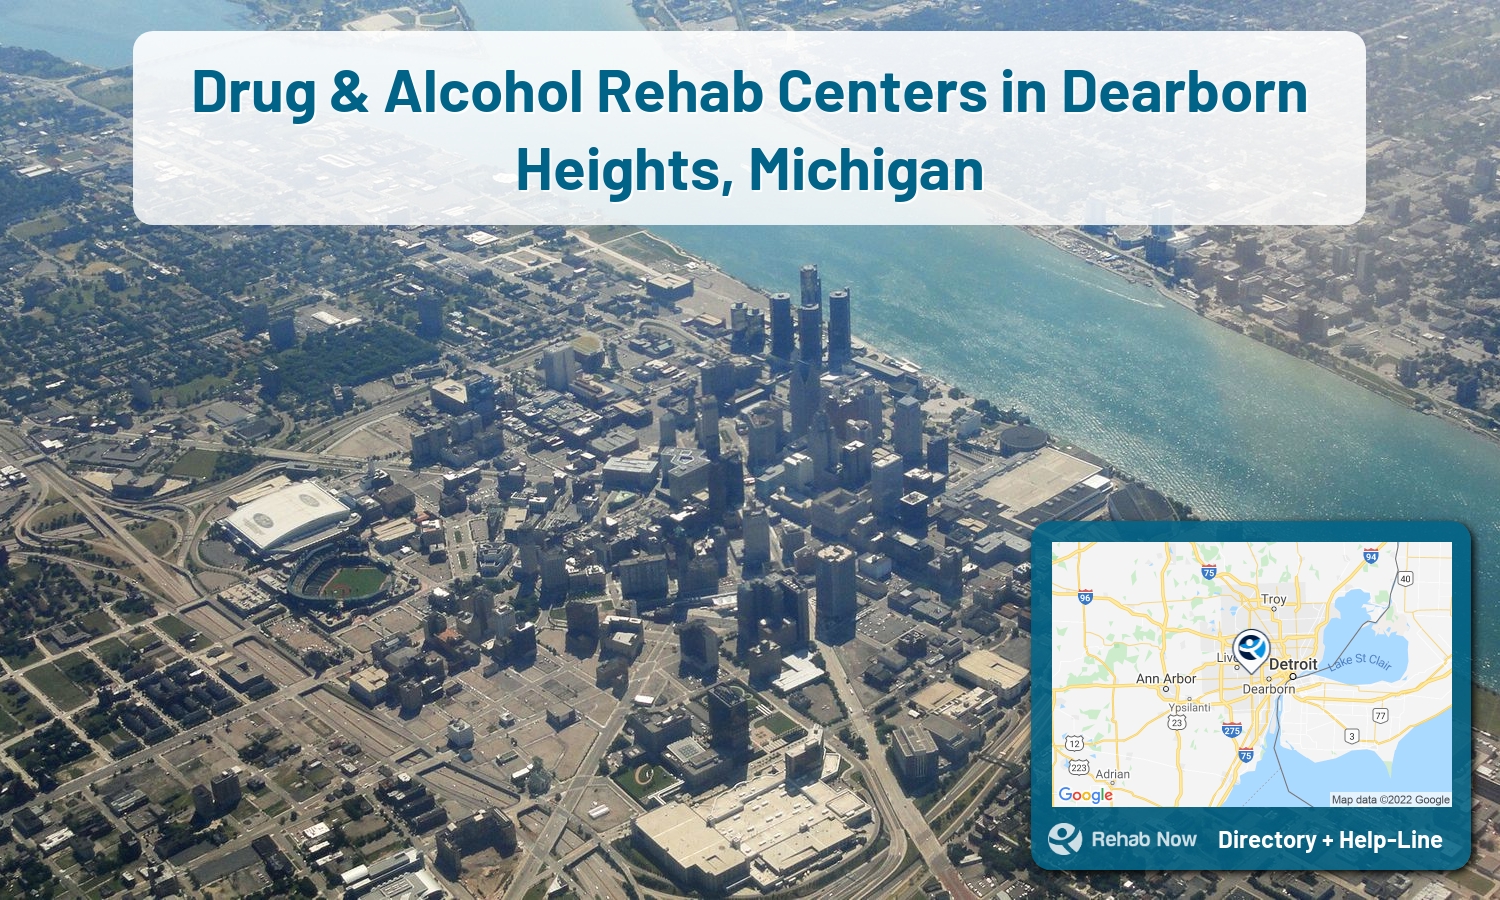 Dearborn Heights, MI Treatment Centers. Find drug rehab in Dearborn Heights, Michigan, or detox and treatment programs. Get the right help now!